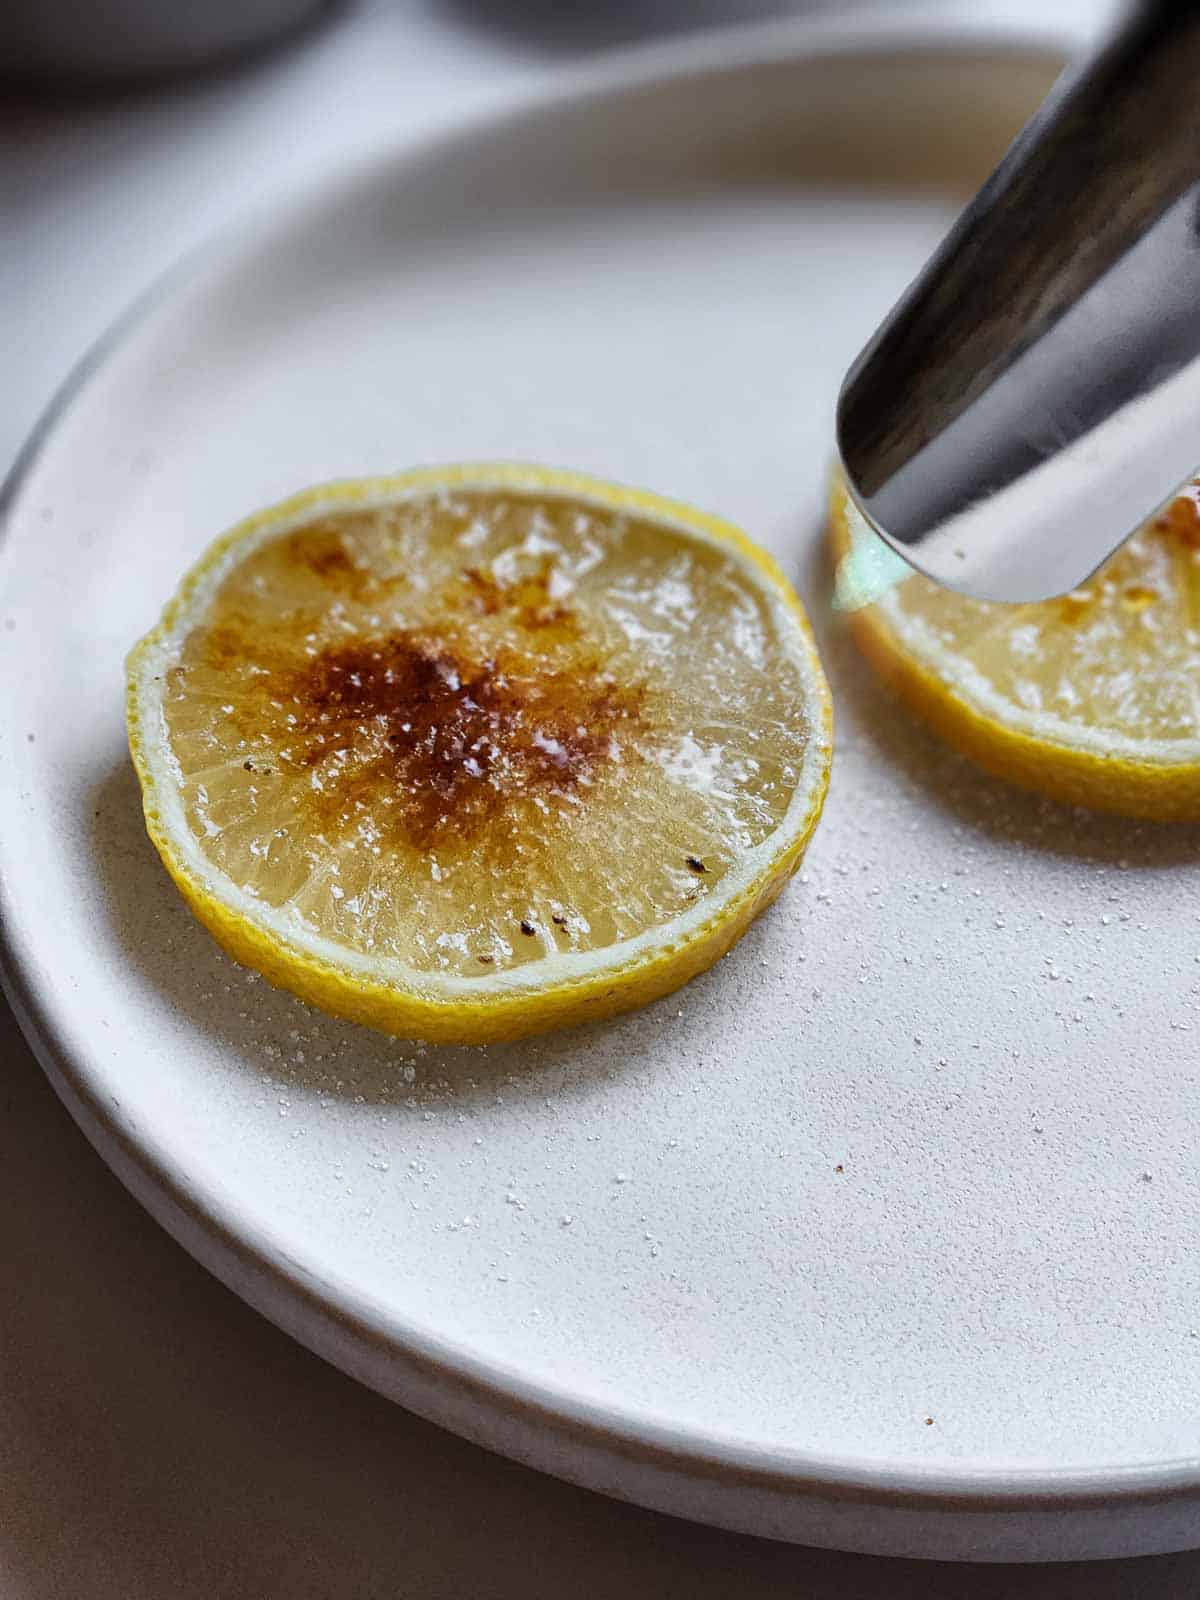 Sugared lemon slices with a kitchen torch pointed at them getting torched.